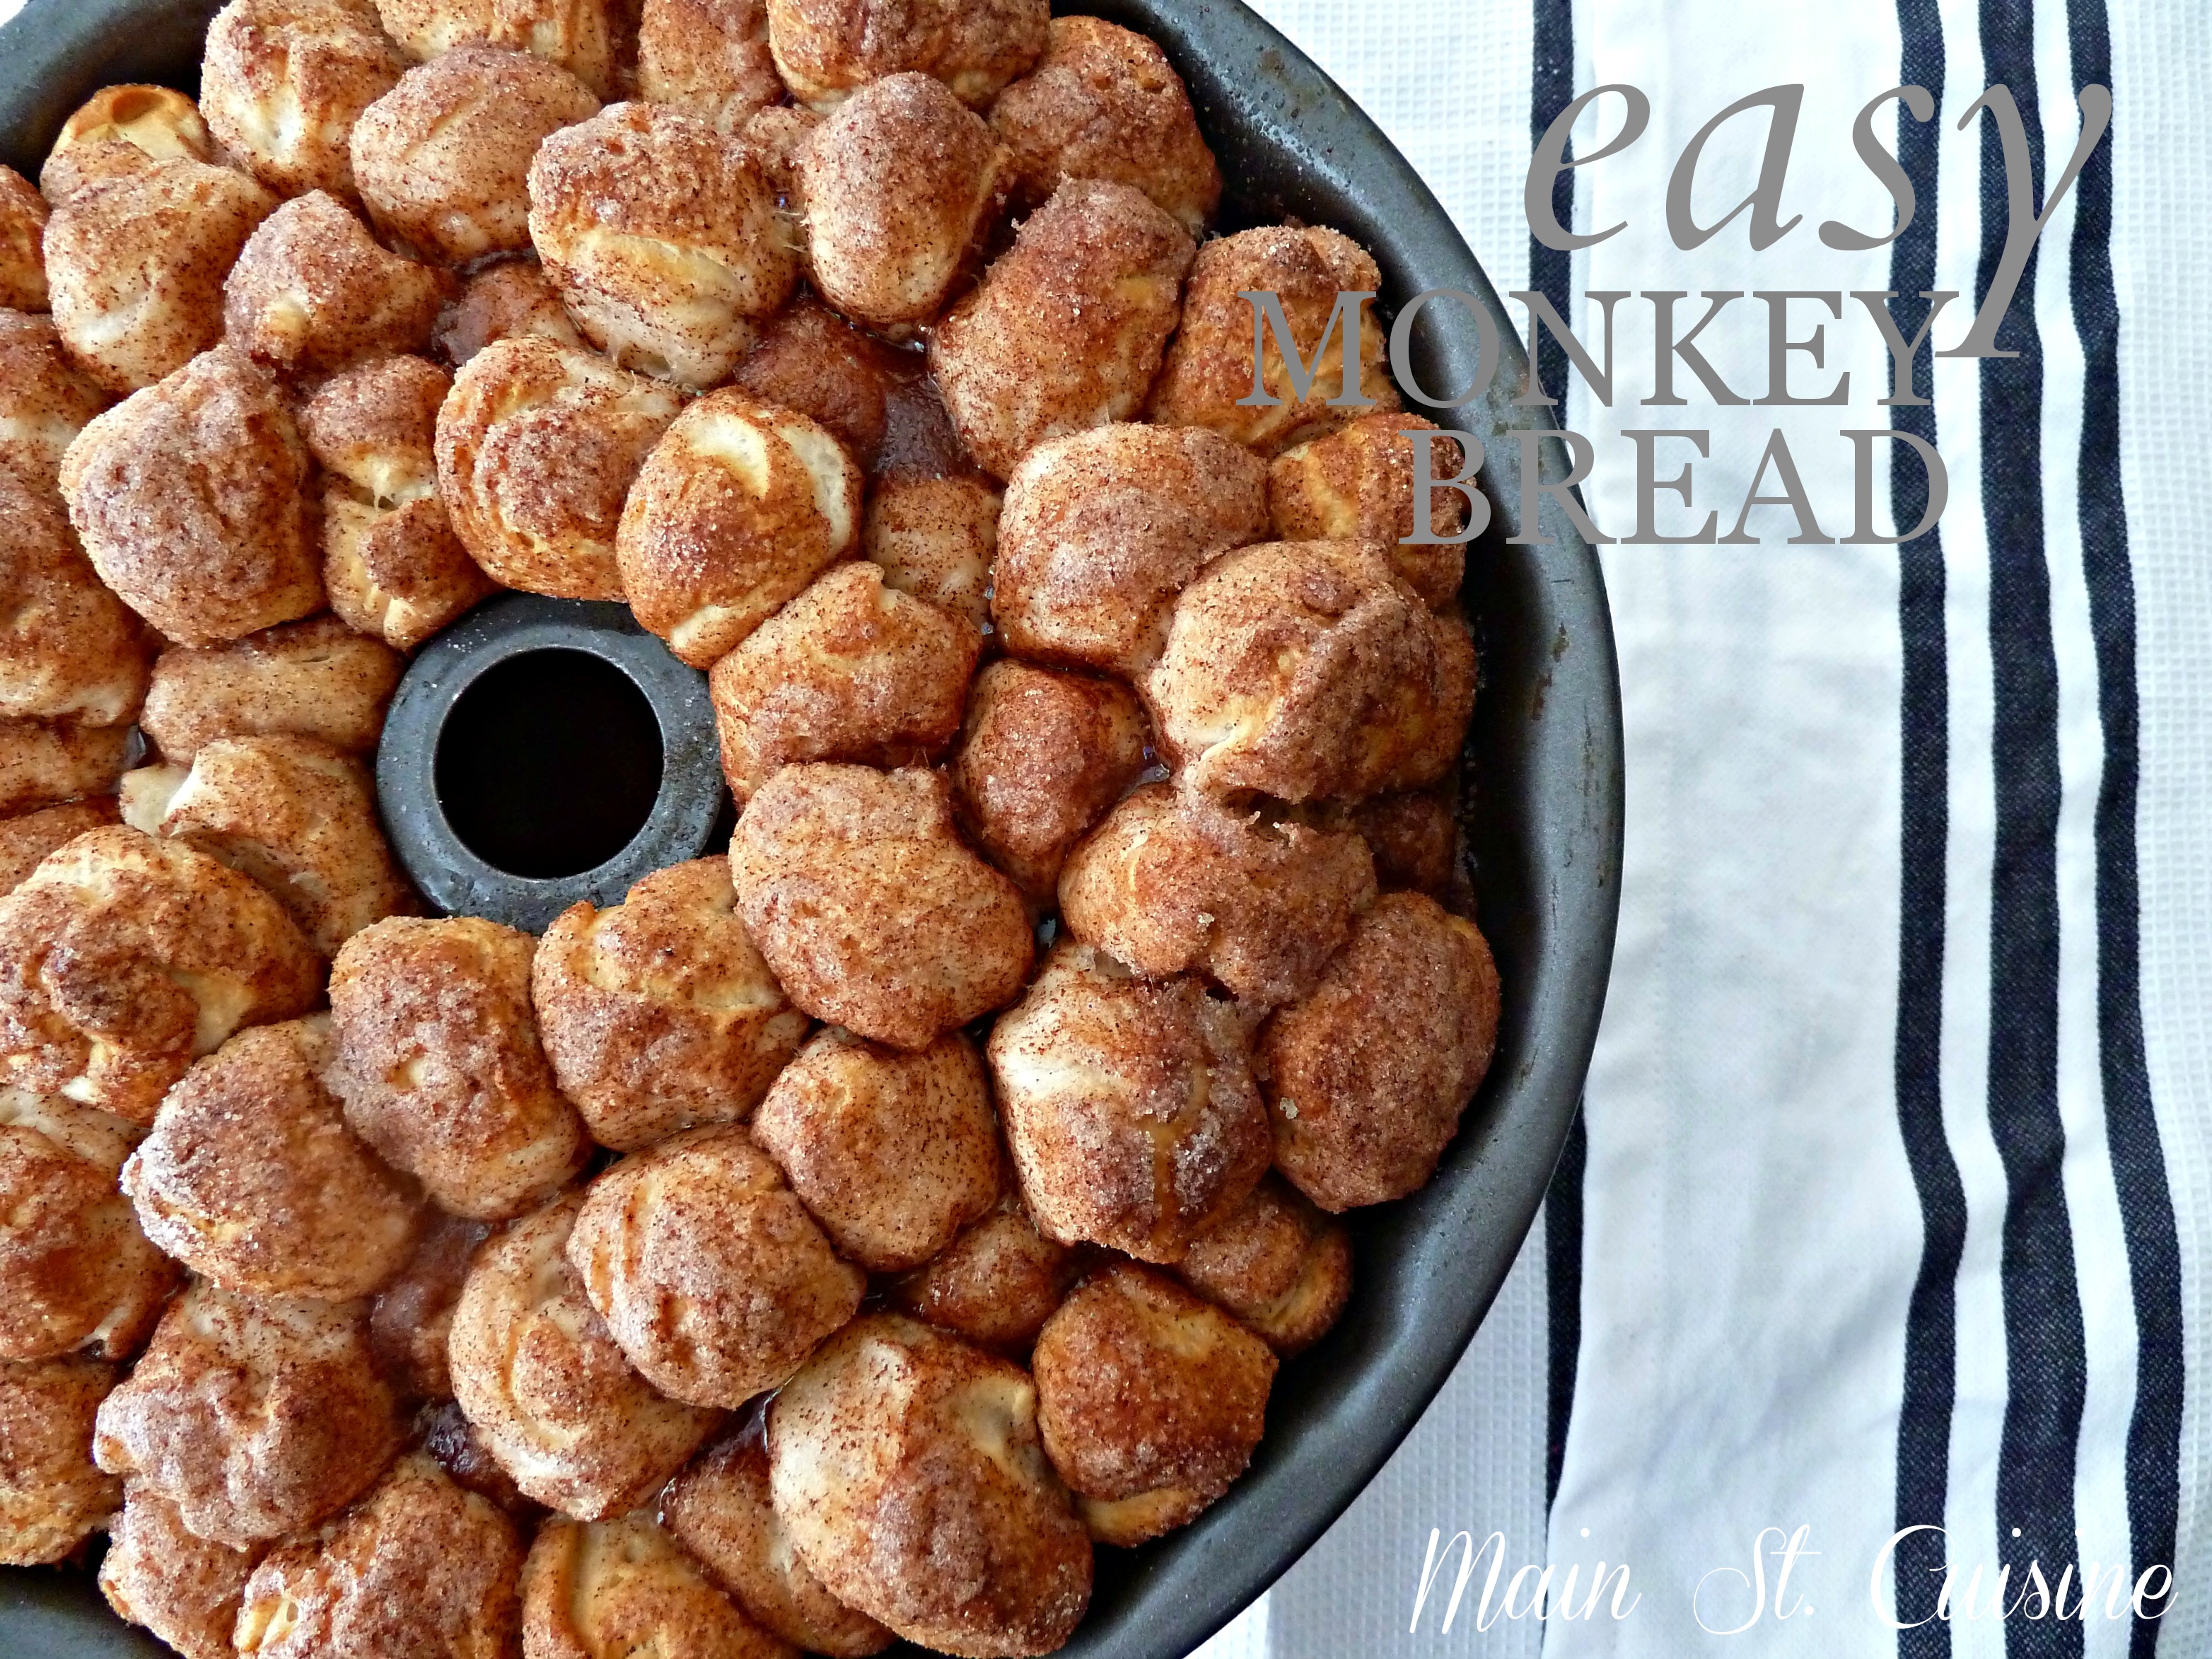 Easy Monkey Bread In Loaf Pan ; How to make Monkey Bread from scratch!